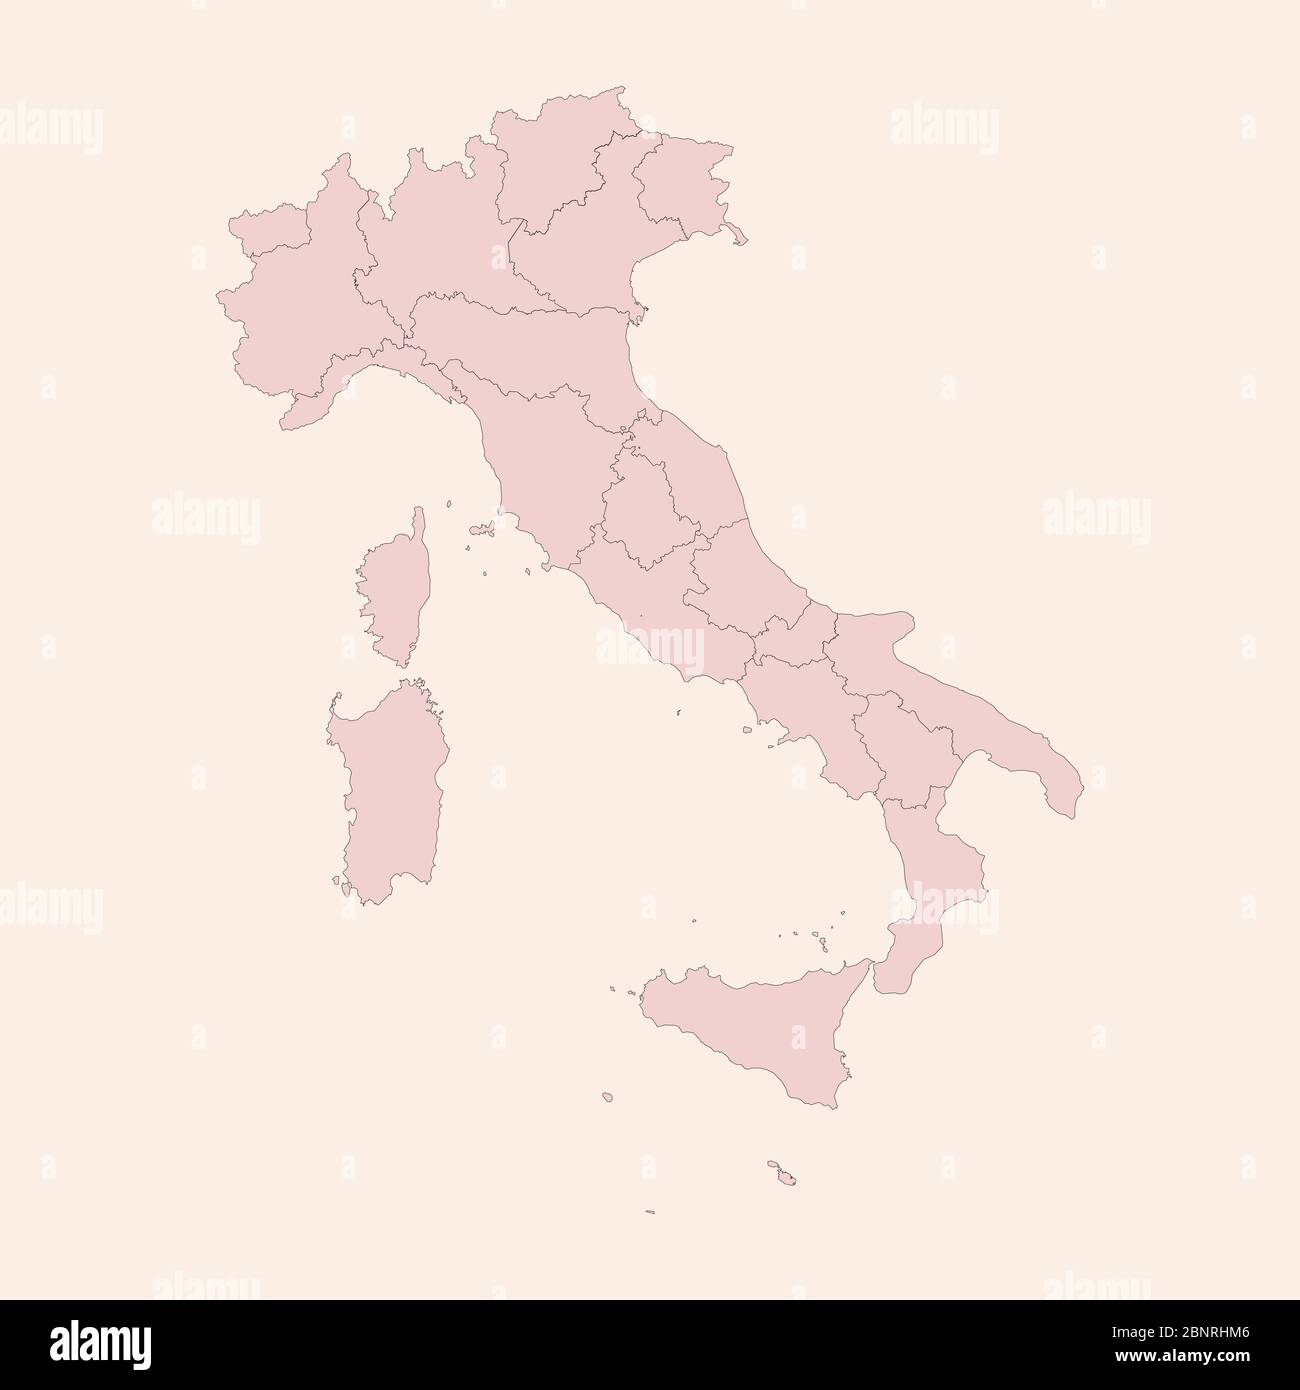 Political Map of Italy - Nations Online Project